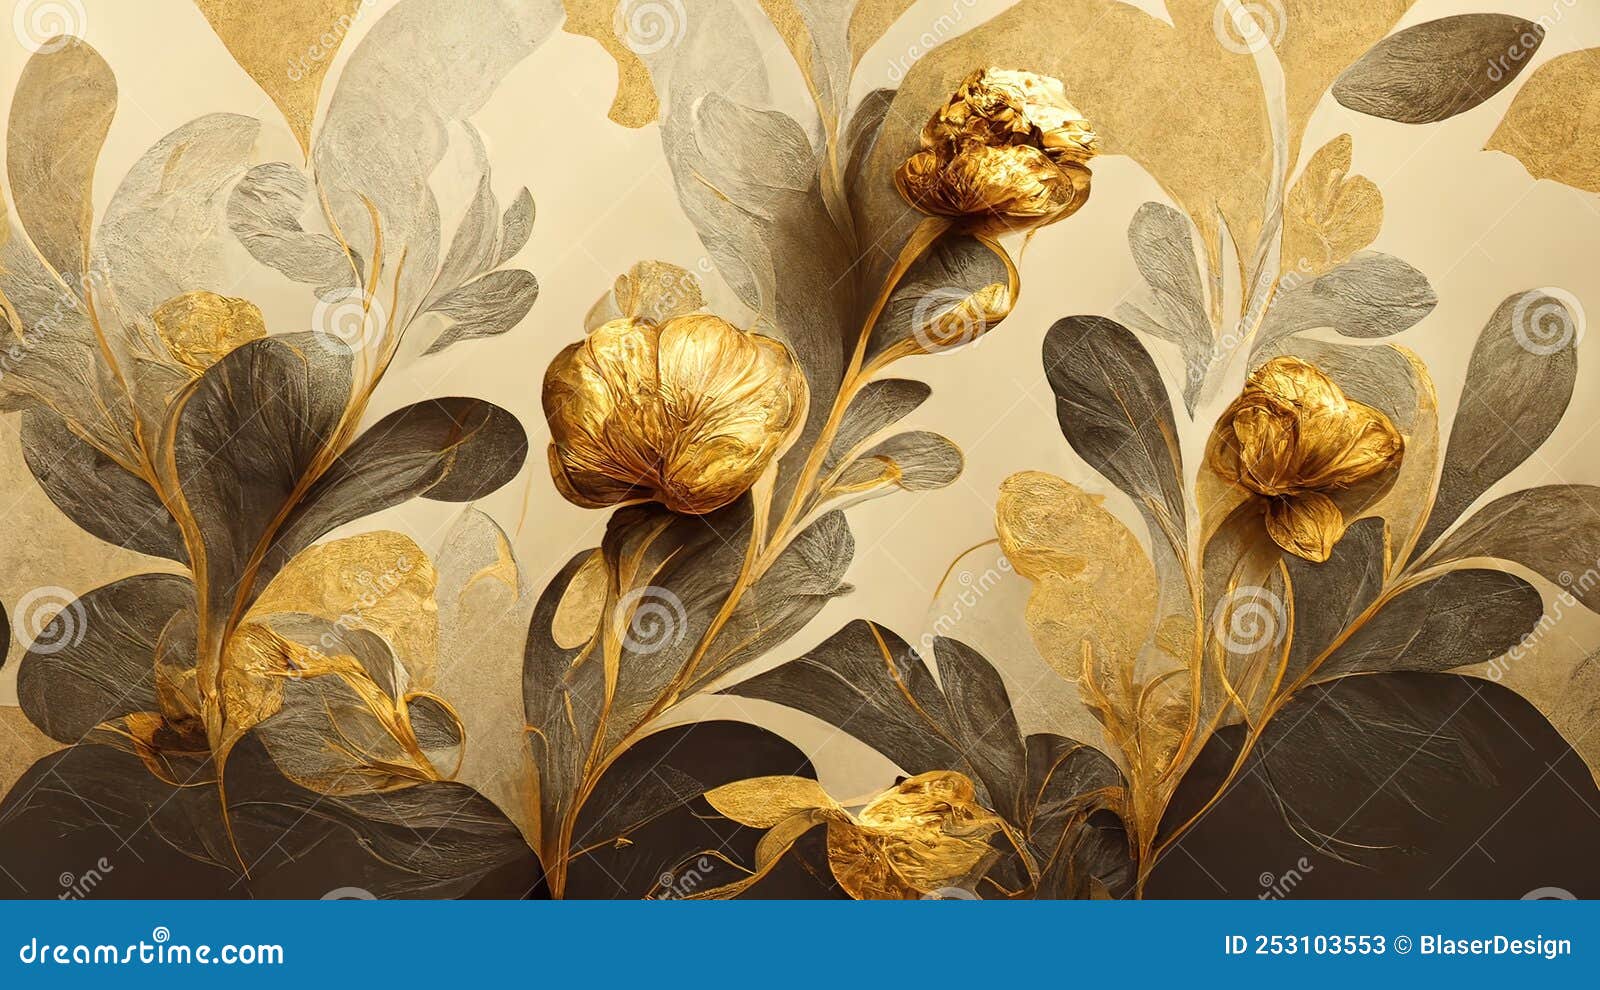 Buy 18 Feet Tulip Floral 300 Gsm Wallpaper Roll at 77 OFF by ArtzFolio   Pepperfry